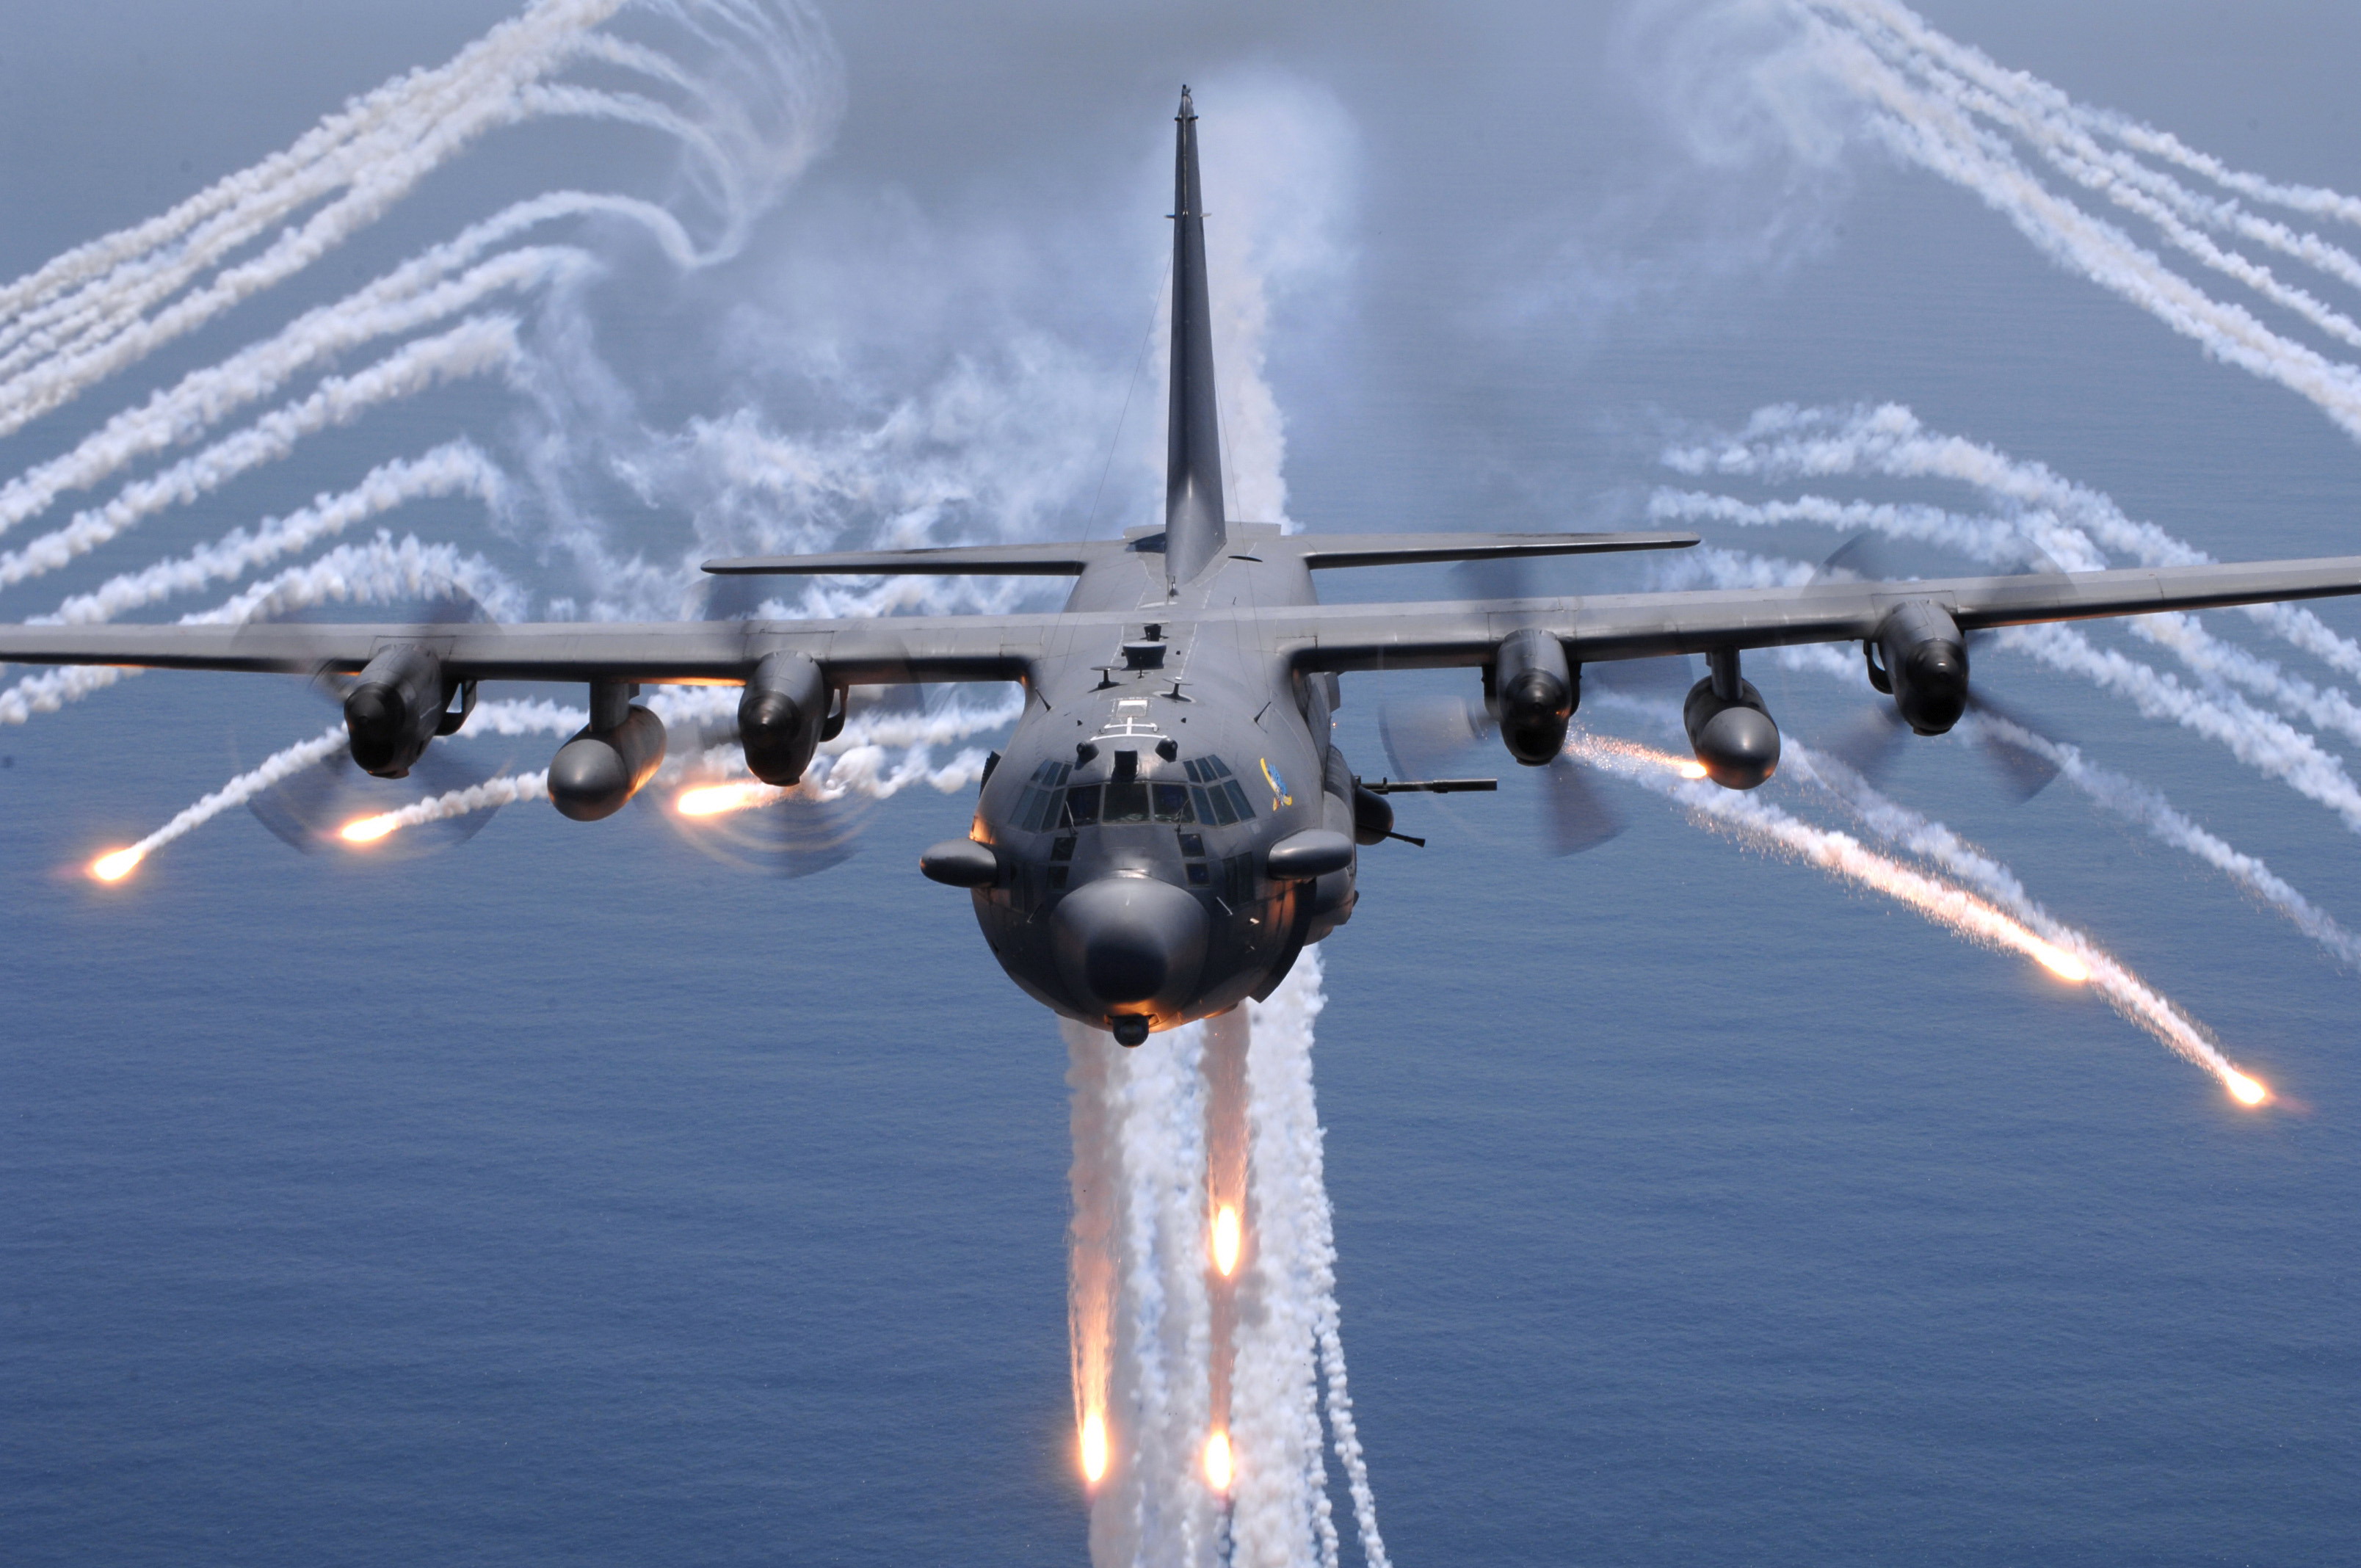 AC-130H Spectre - USAF Special Operations Photo